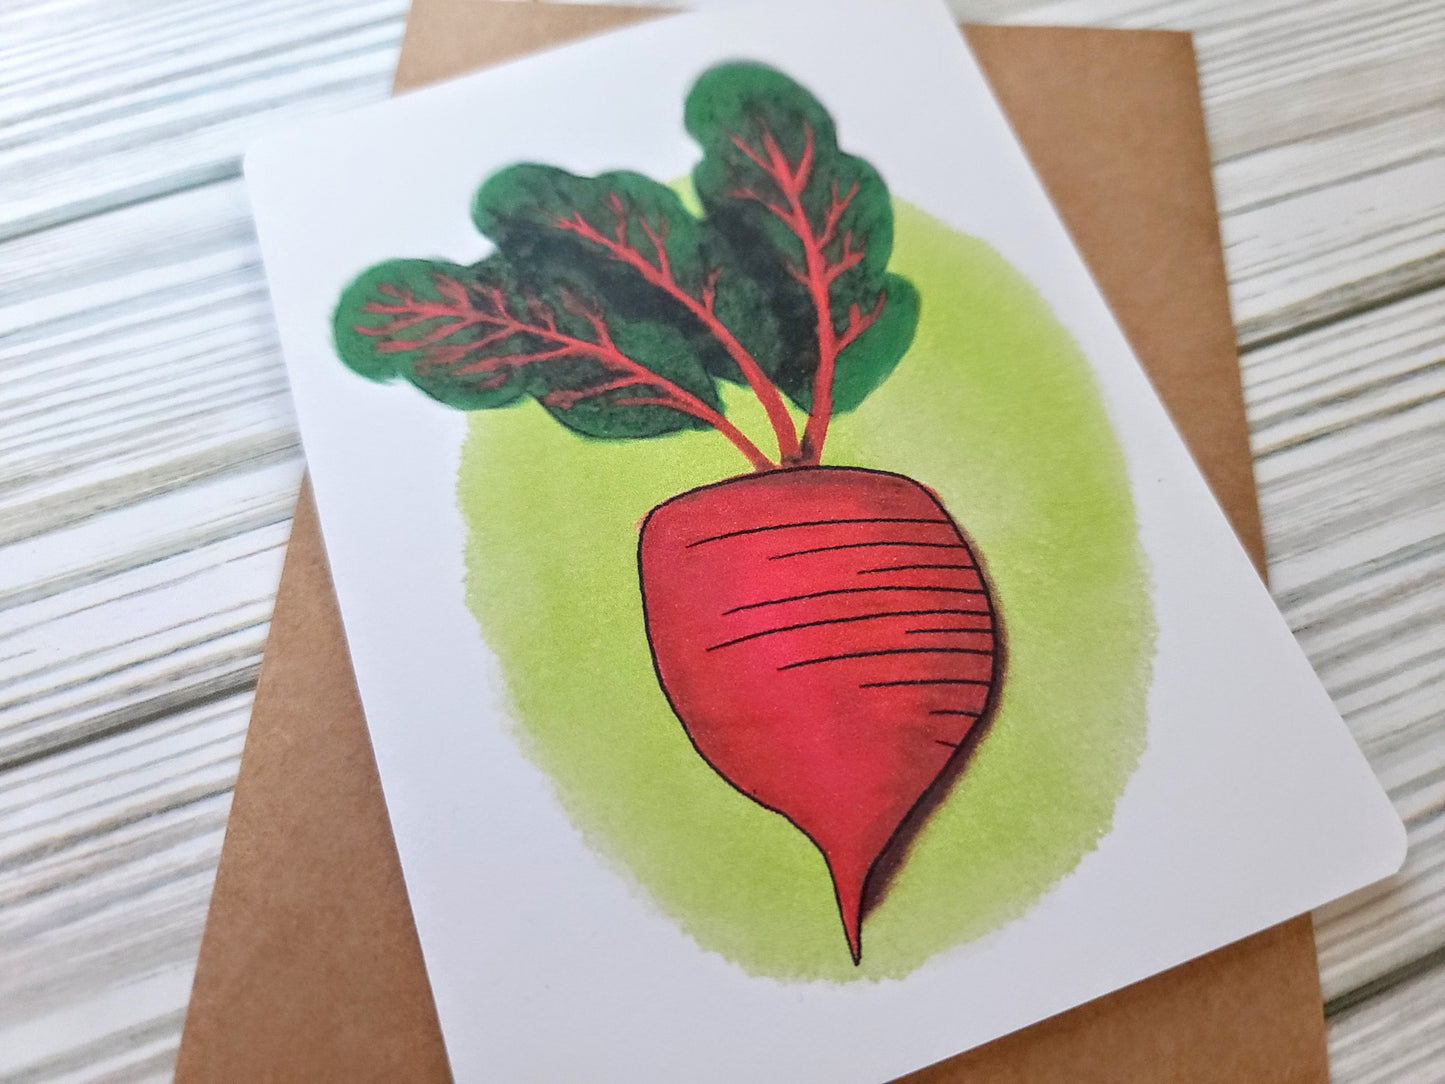 Beet Handmade Greeting Card - Recycled Paper and Kraft Envelope - Angled Overhead Shot